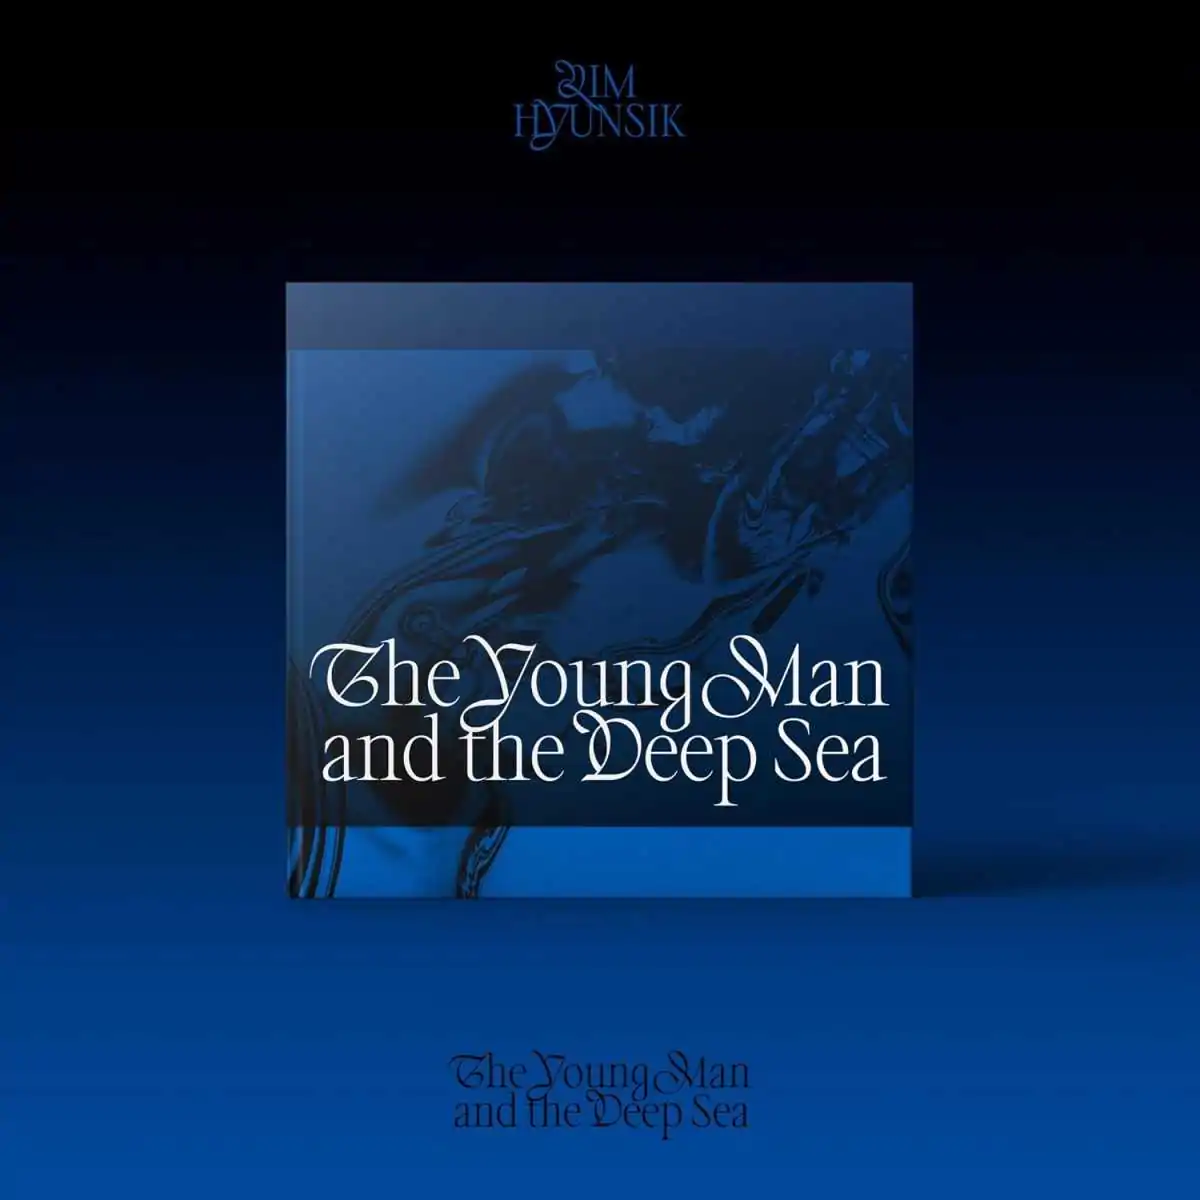 LIM HYUNSIK - The Young Man and the Deep Sea (2nd Mini Album) 